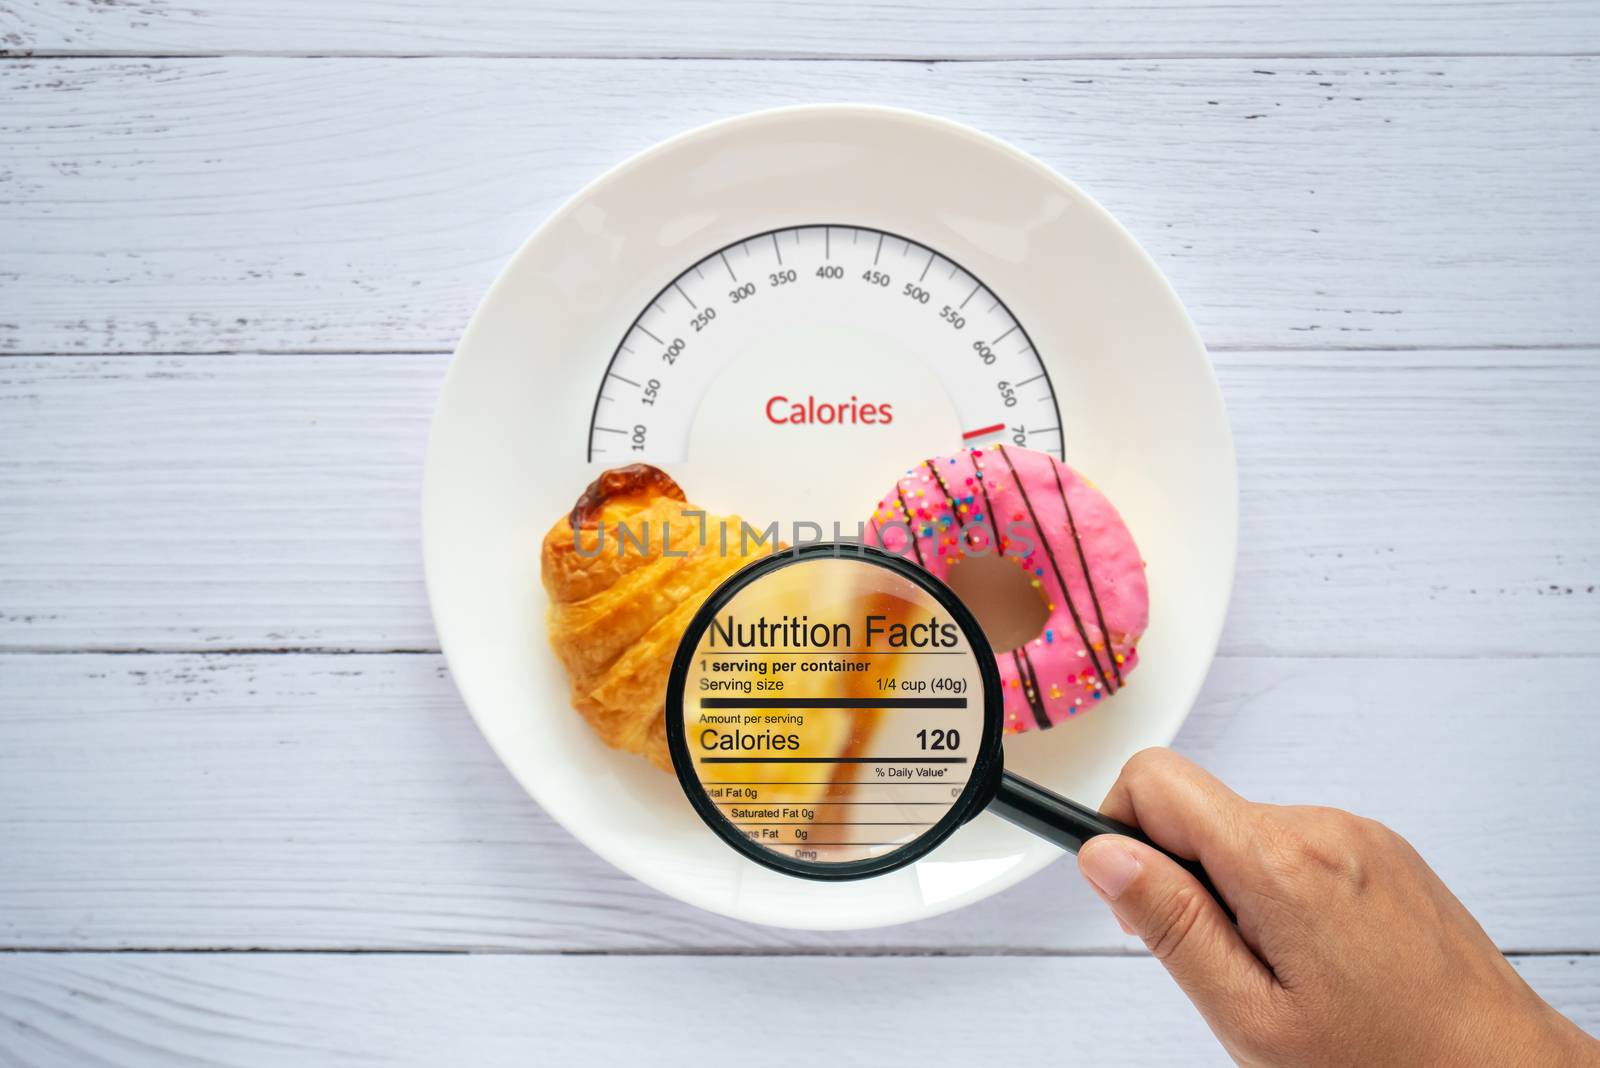 Calories counting, food control and consumer nutrition facts label concept. doughnut and croissant on white plate with tongue scales for Calories measuring and magnifying glass zoom for nutrition fact by asiandelight